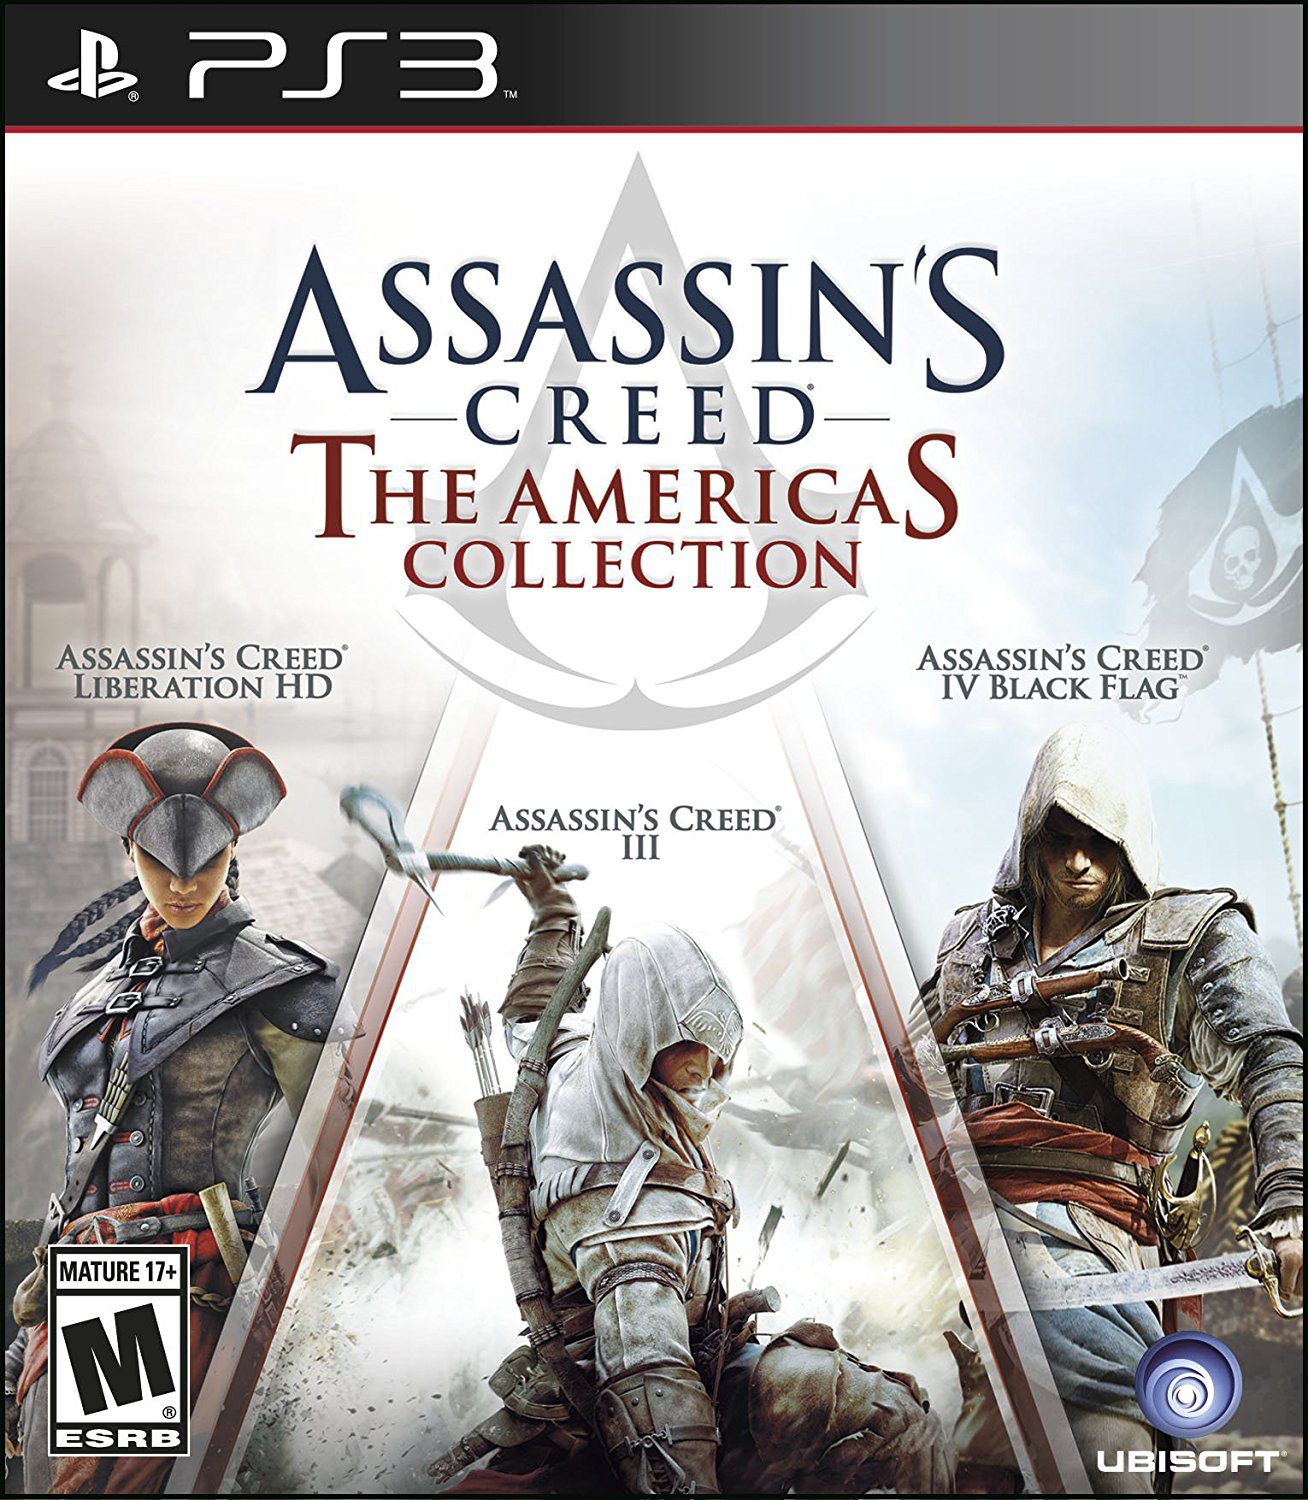 Assassins Creed’s Collection